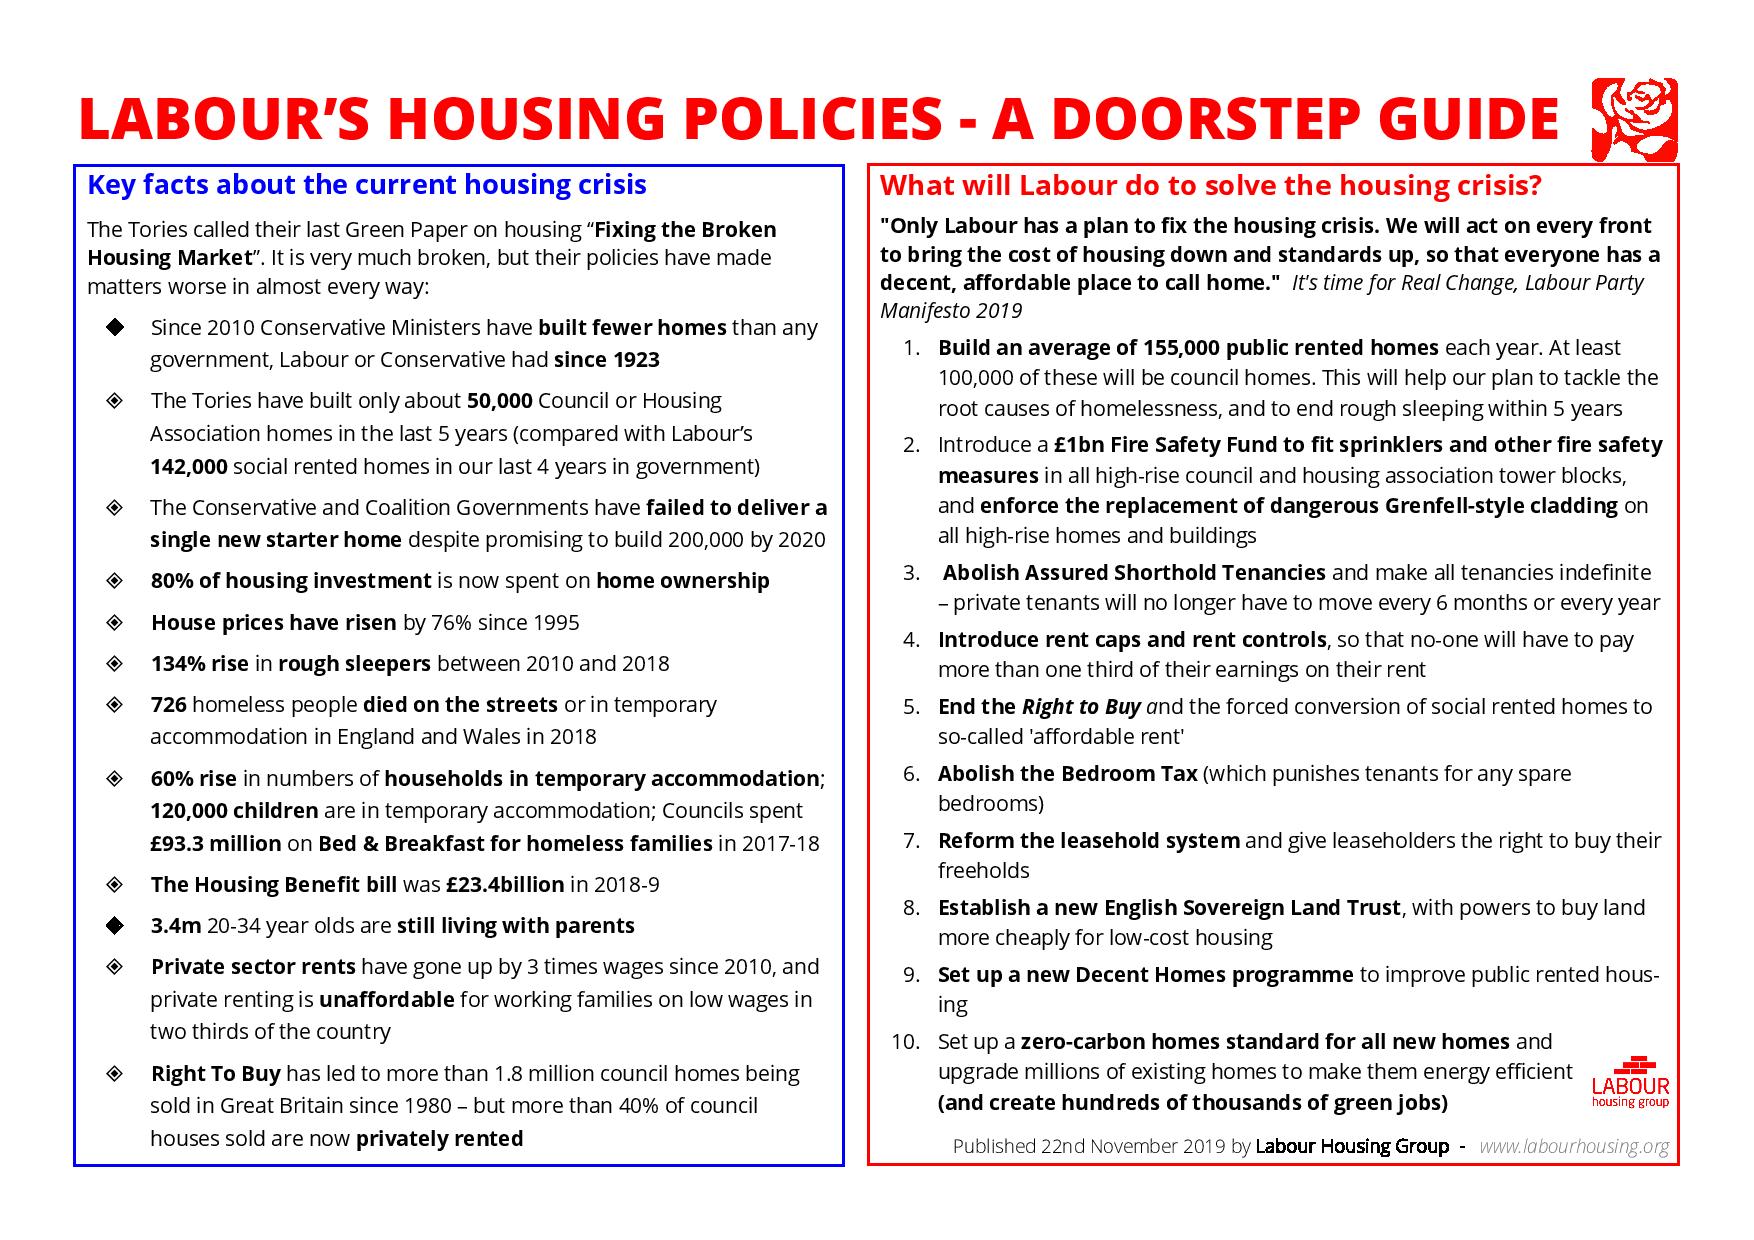 LHG Housing Policy Guide GE 2019